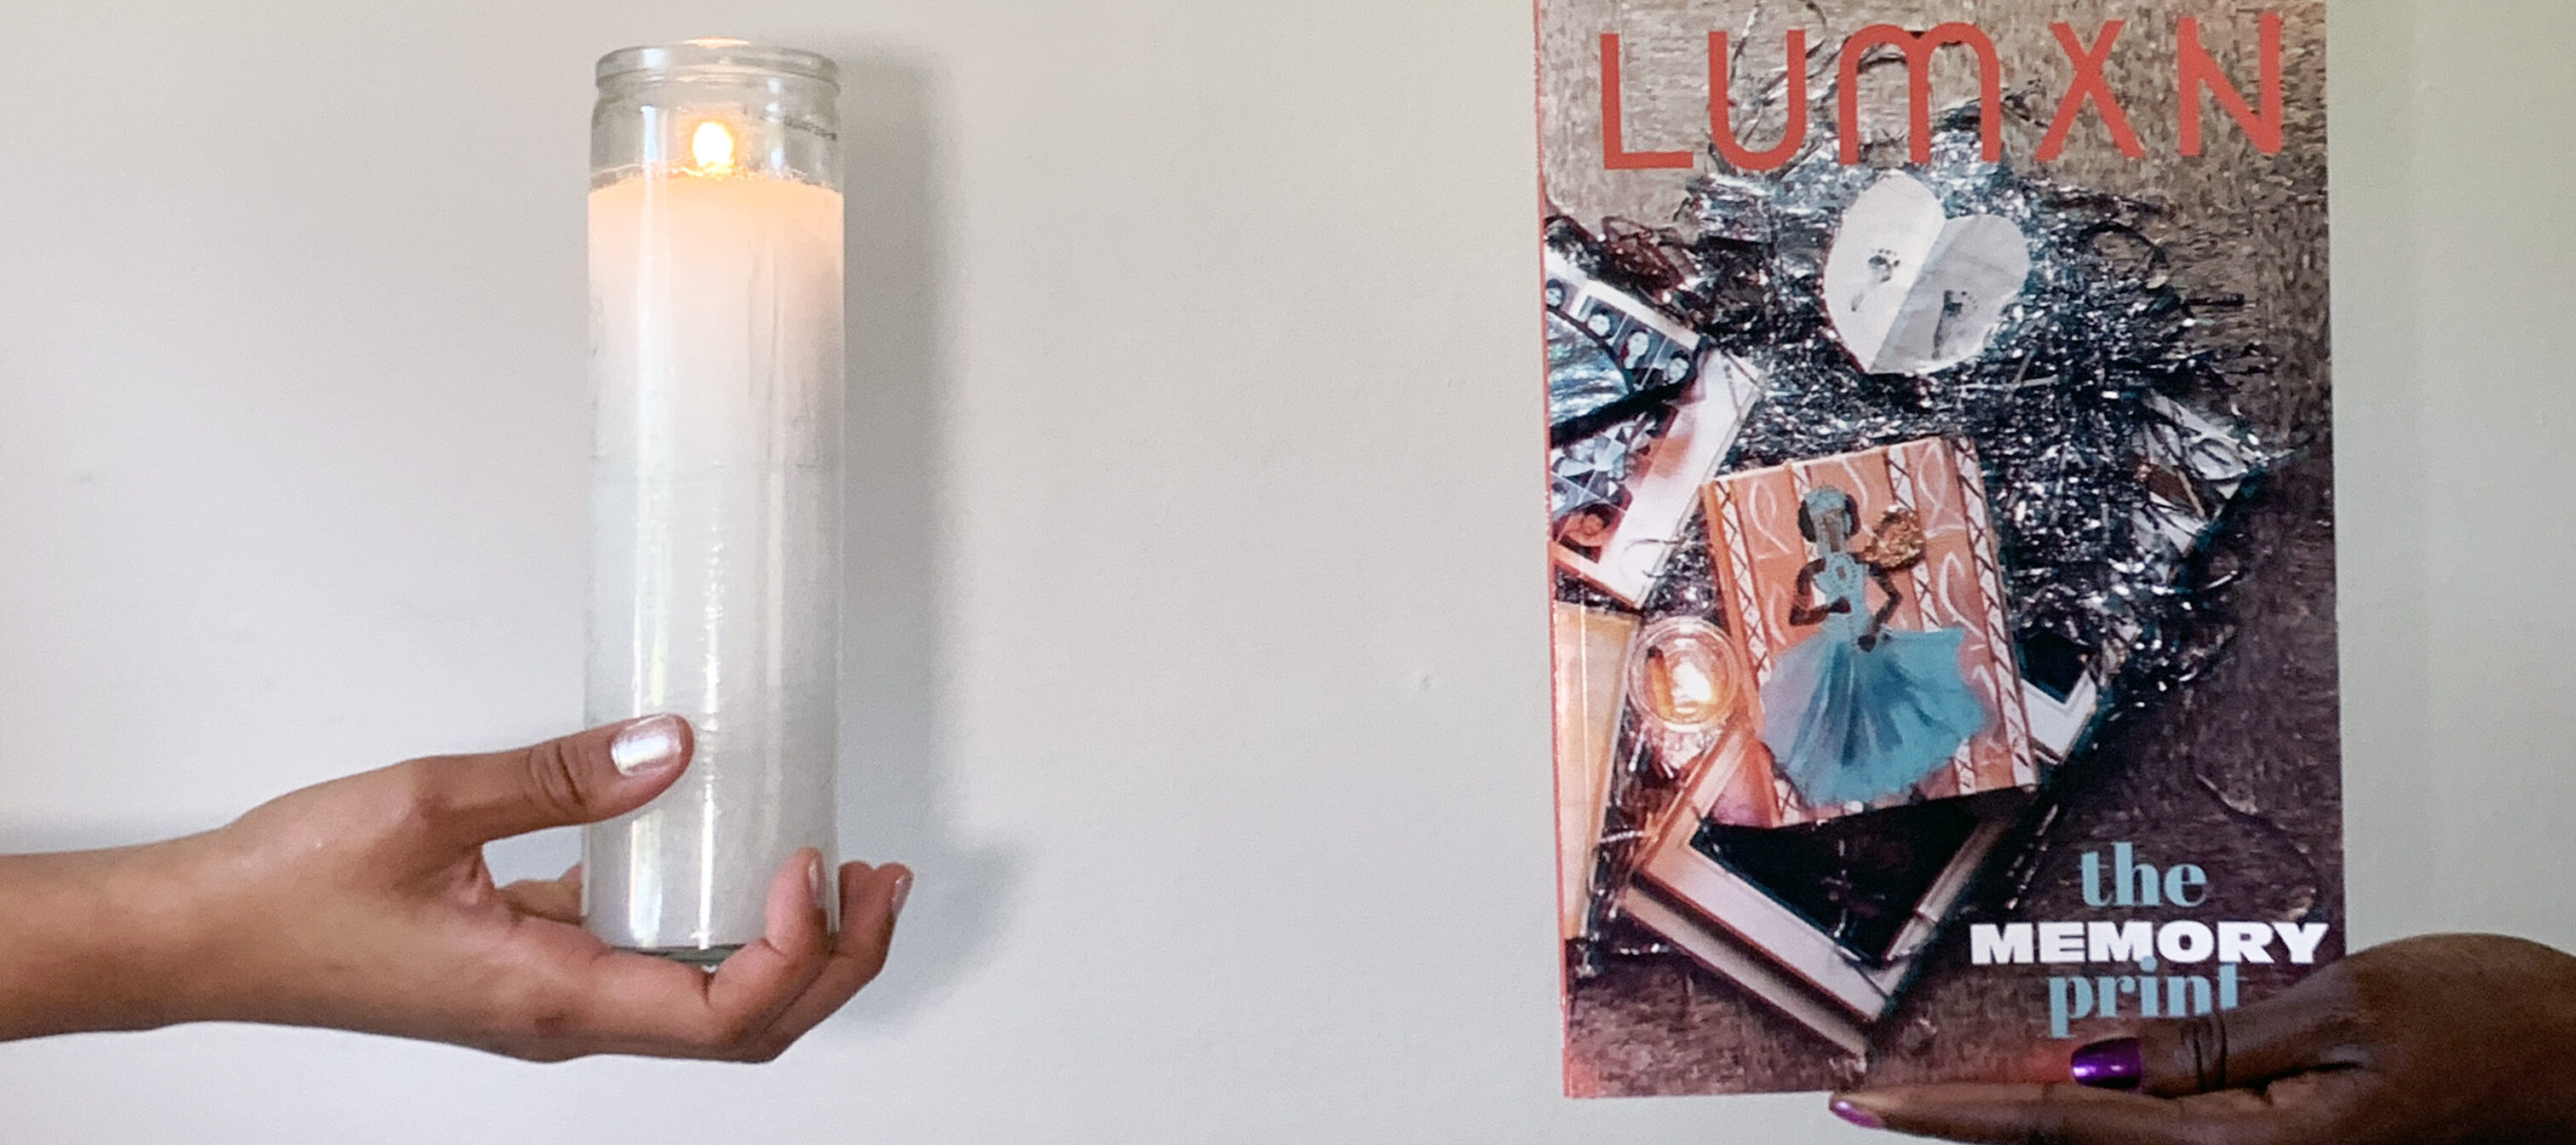 Two hands enter the frame from the left and right sides. On the left, the light-skinned hand has silver nail polish and holds a white, tall, lit votive candle. The hand on the right is dark-skinned and holds a magazine that says 